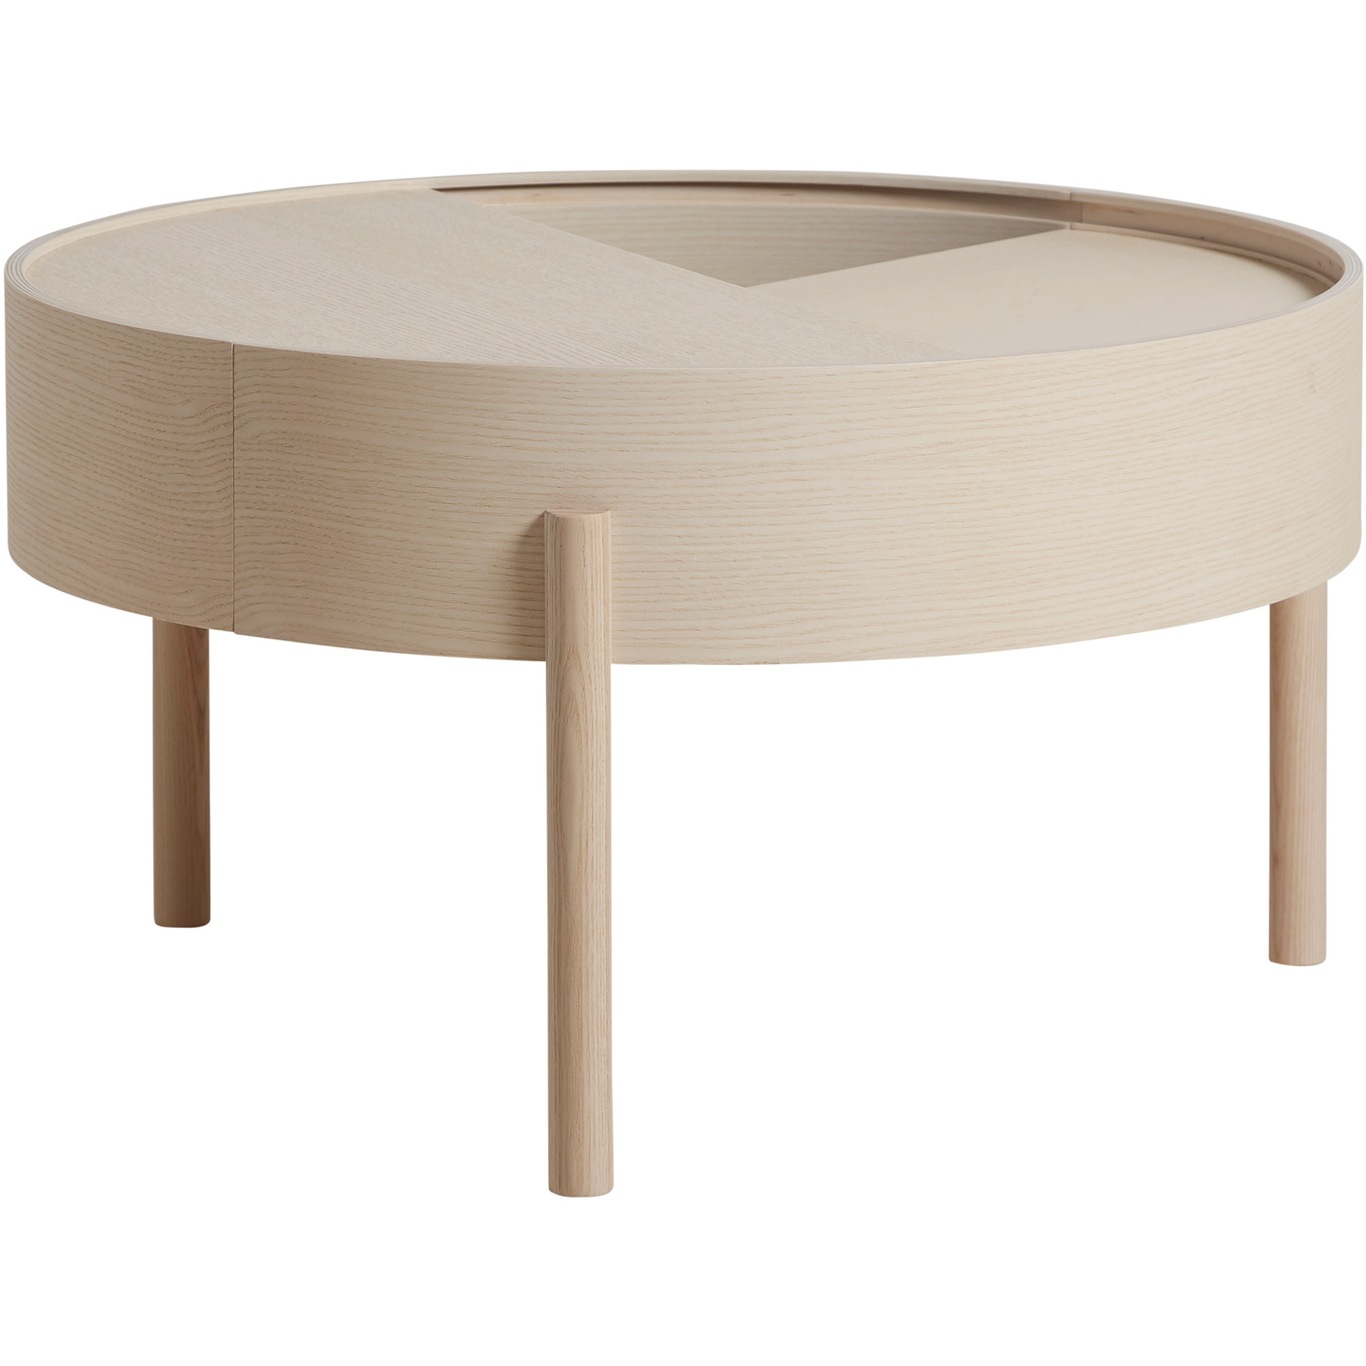 ARC Coffee Table, White pigmented ash